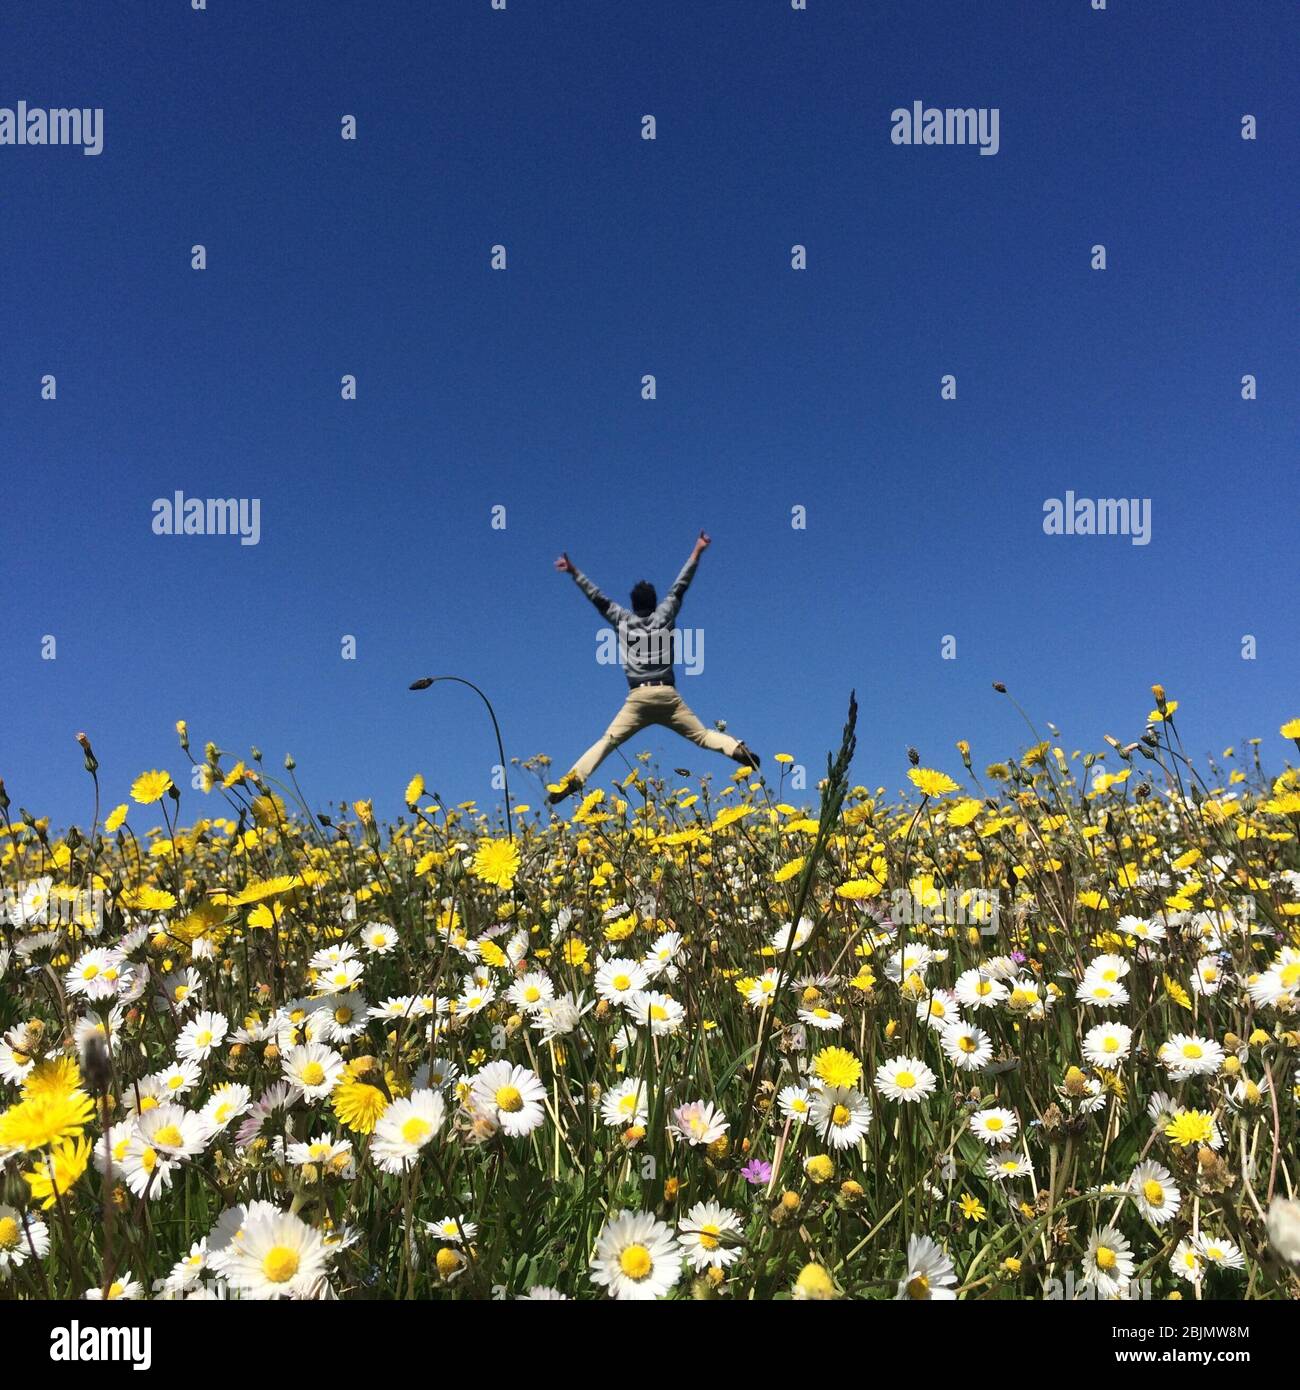 Man jumping mid air in a field of daisies and dandelions, France Stock Photo